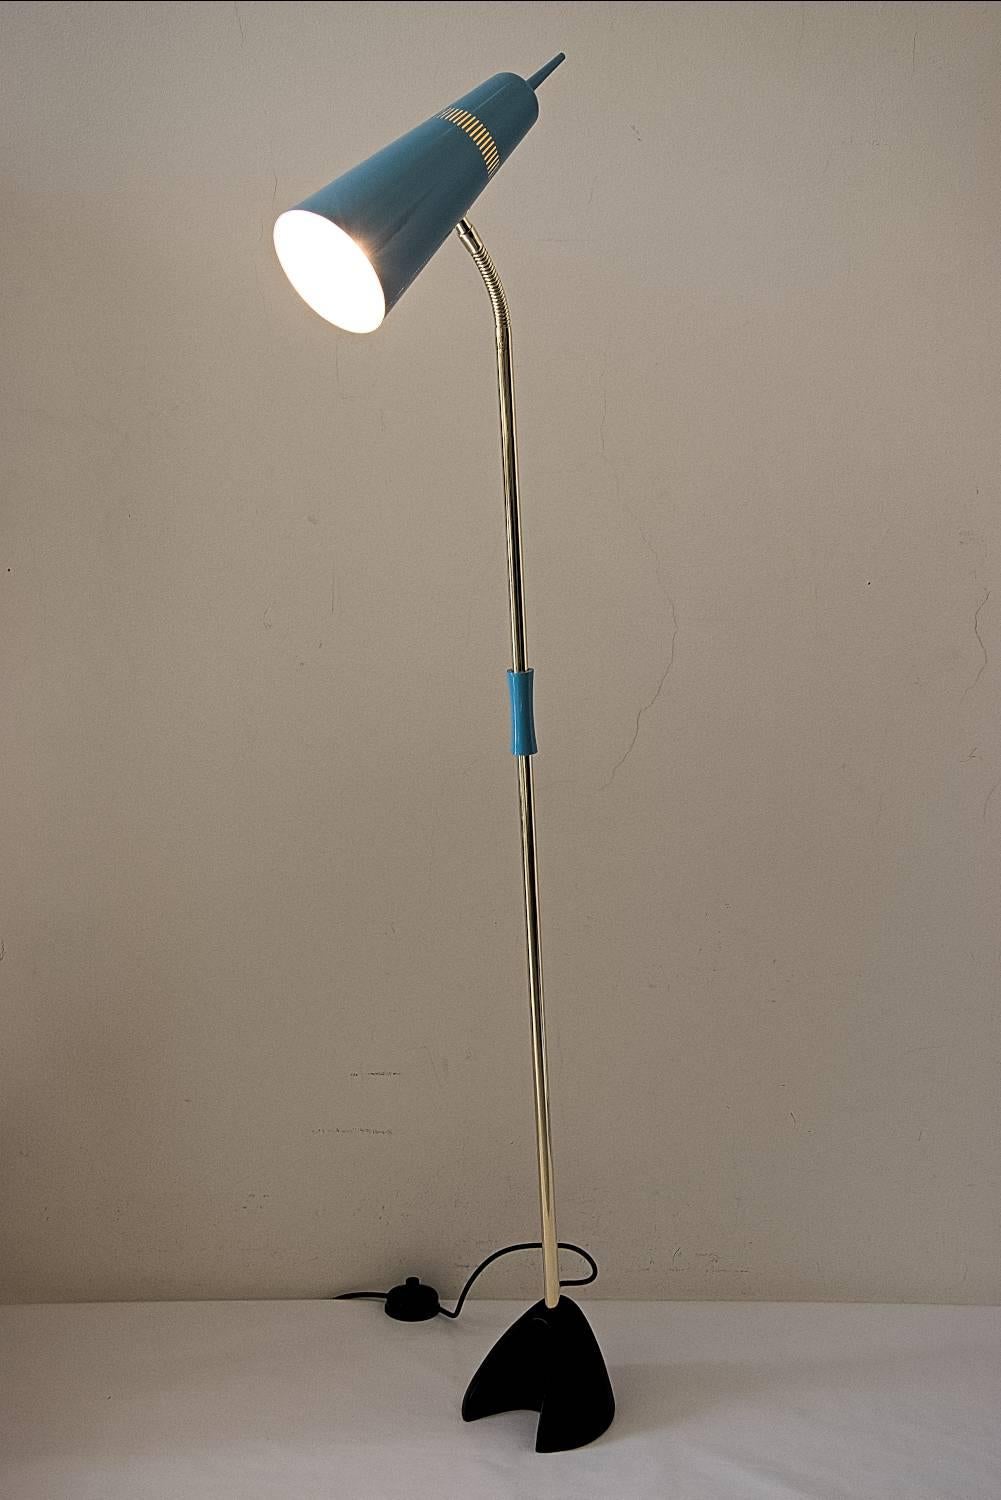 Floor lamp, Vienna, 1950s
Original antique only polished brass
Shade is aluminium laquered 
Wood handle painted
Iron base black painted.